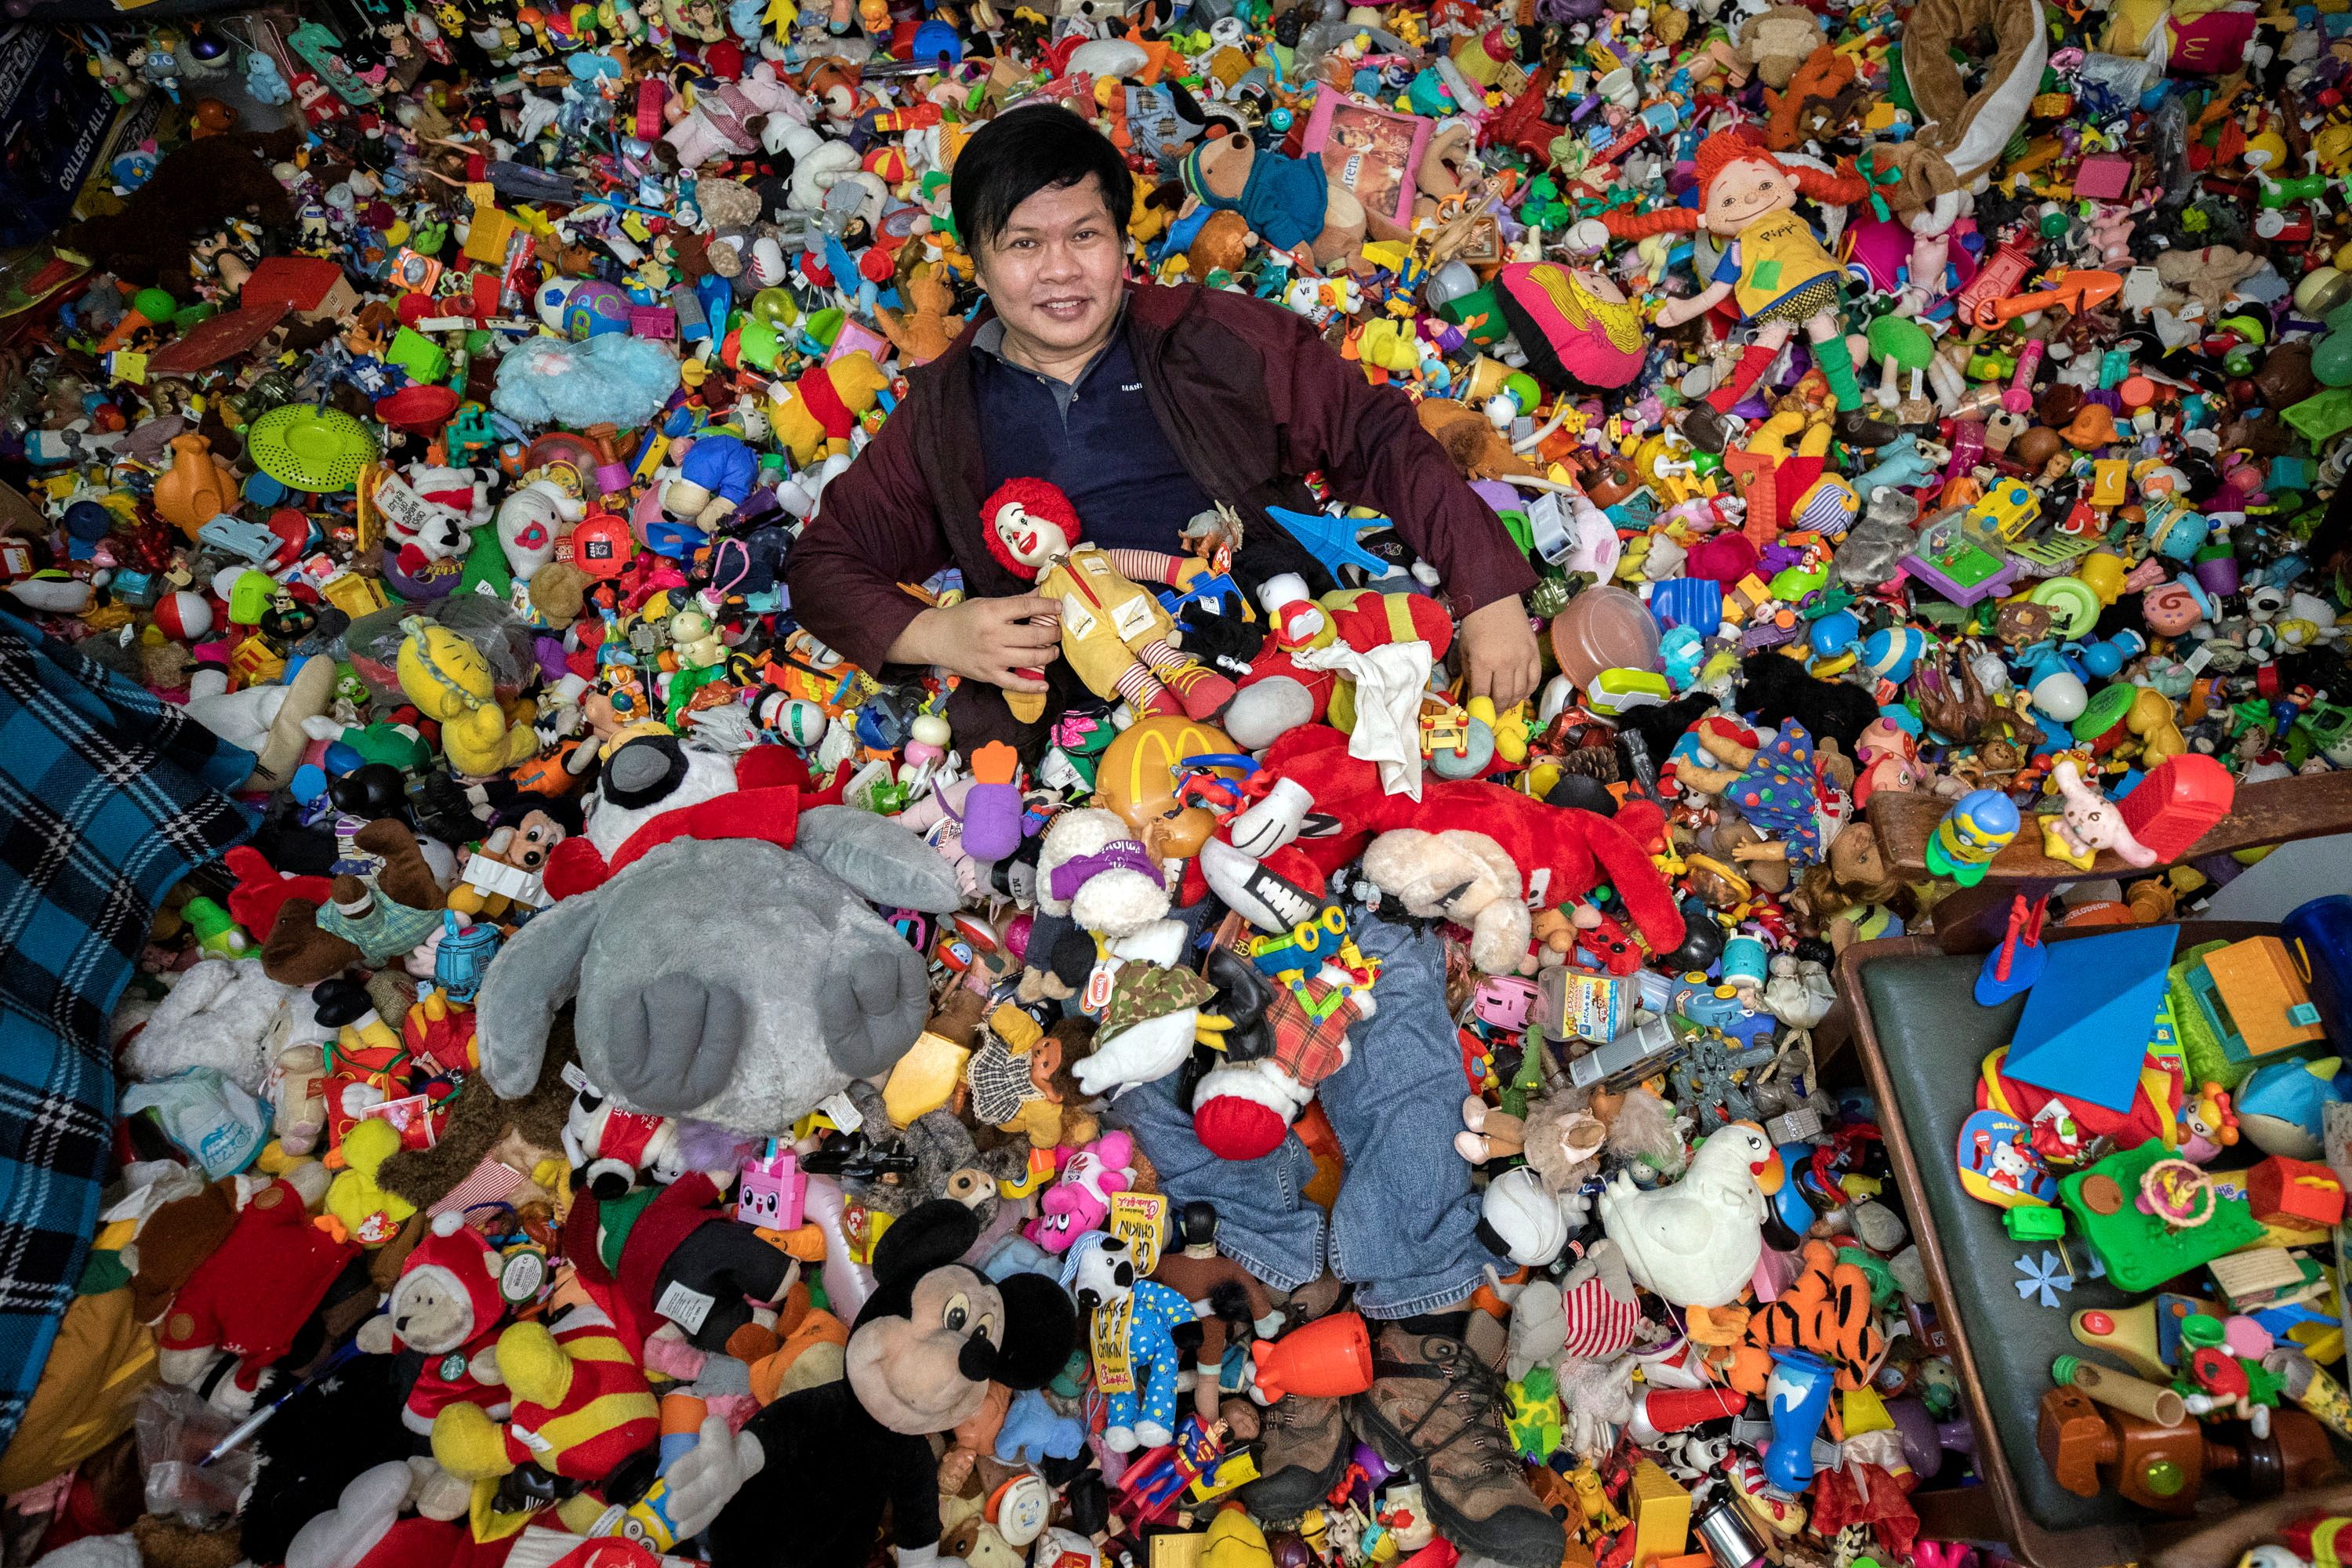 Philippine collector amasses super-sized collection of fast-food toys